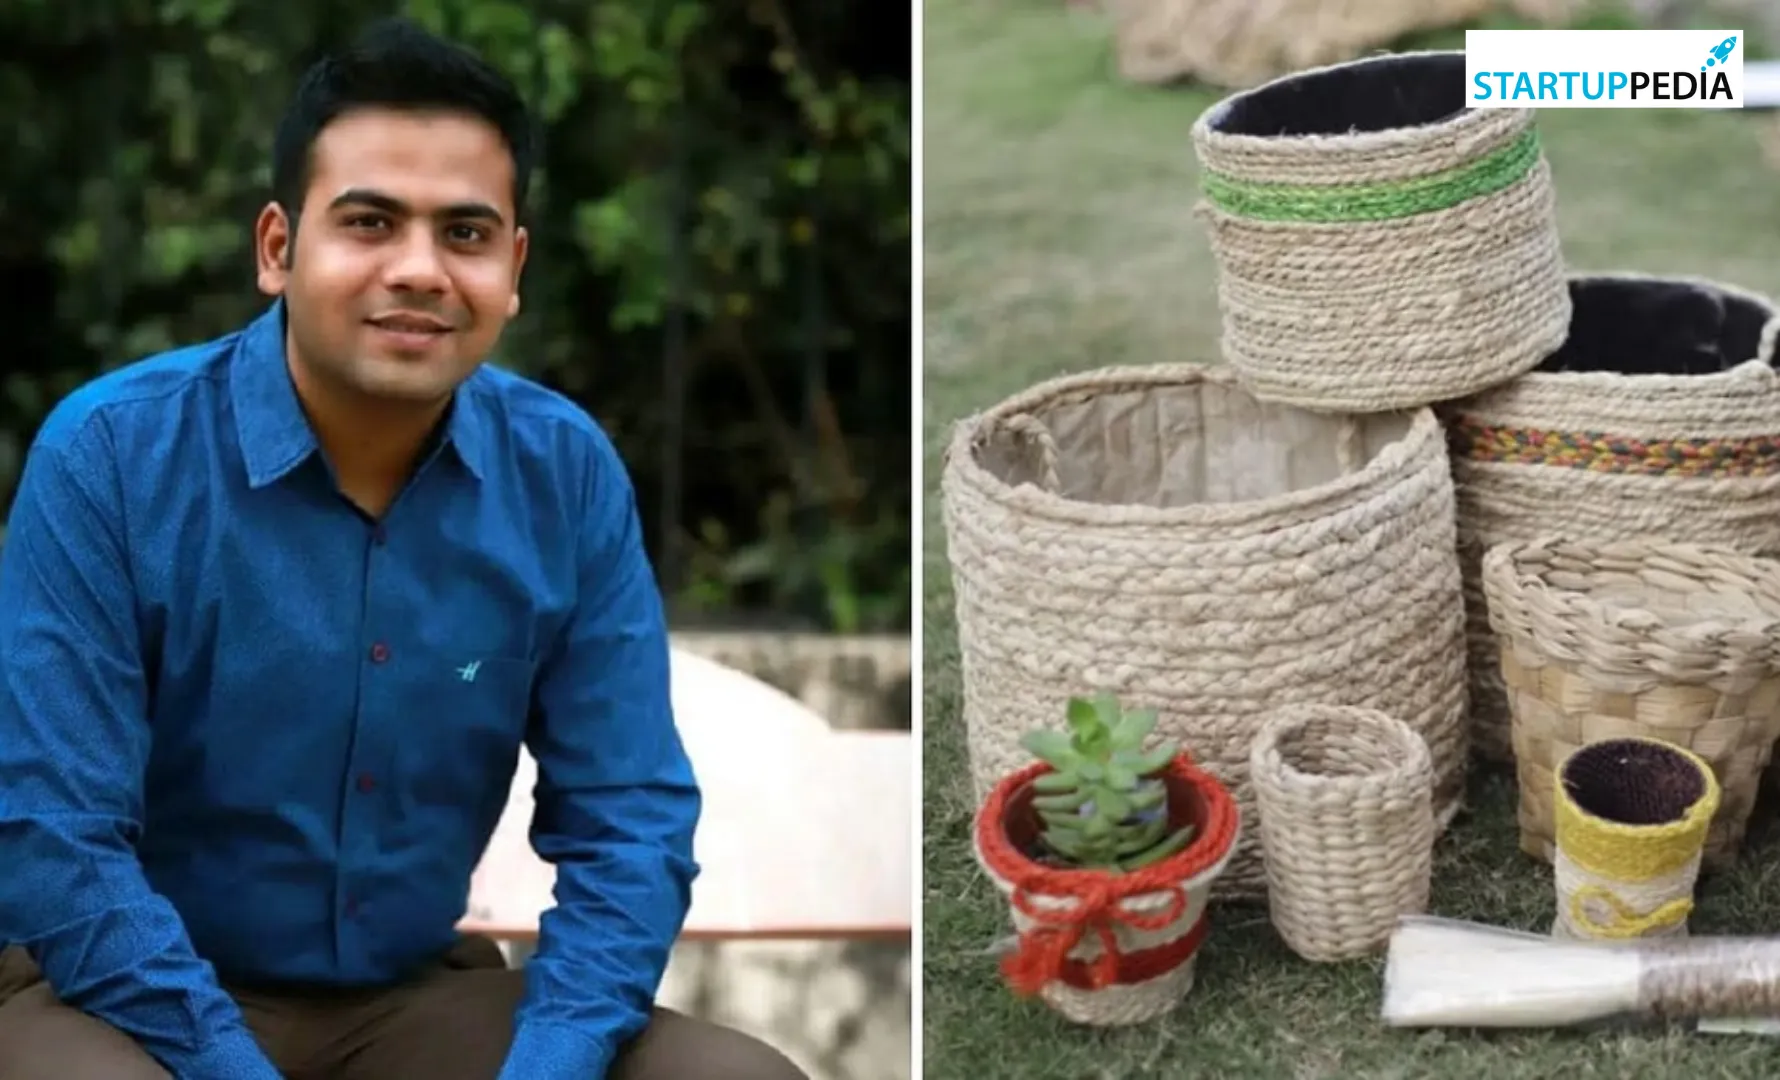 This MP based Young MBA Grad from Turns 5 Tonnes of Banana Waste/Month into Eco-Friendly Crafts, Earns Lakhs